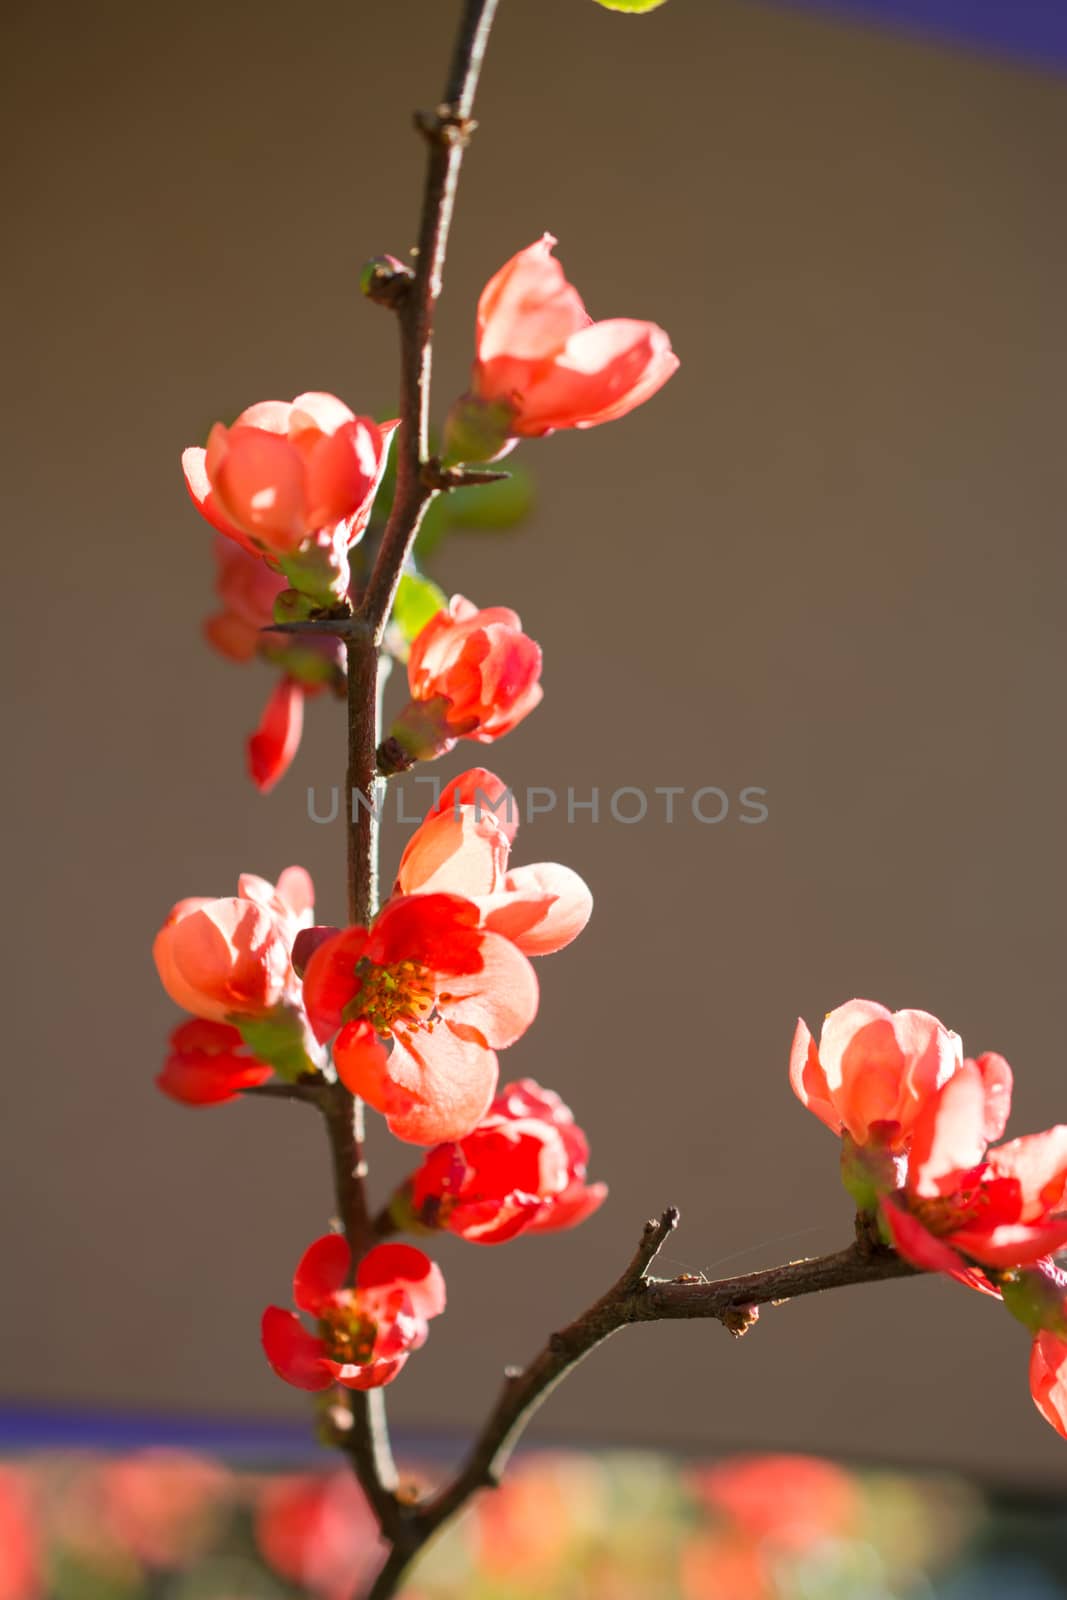 Tree bloom blossom beautiful flowers on a background